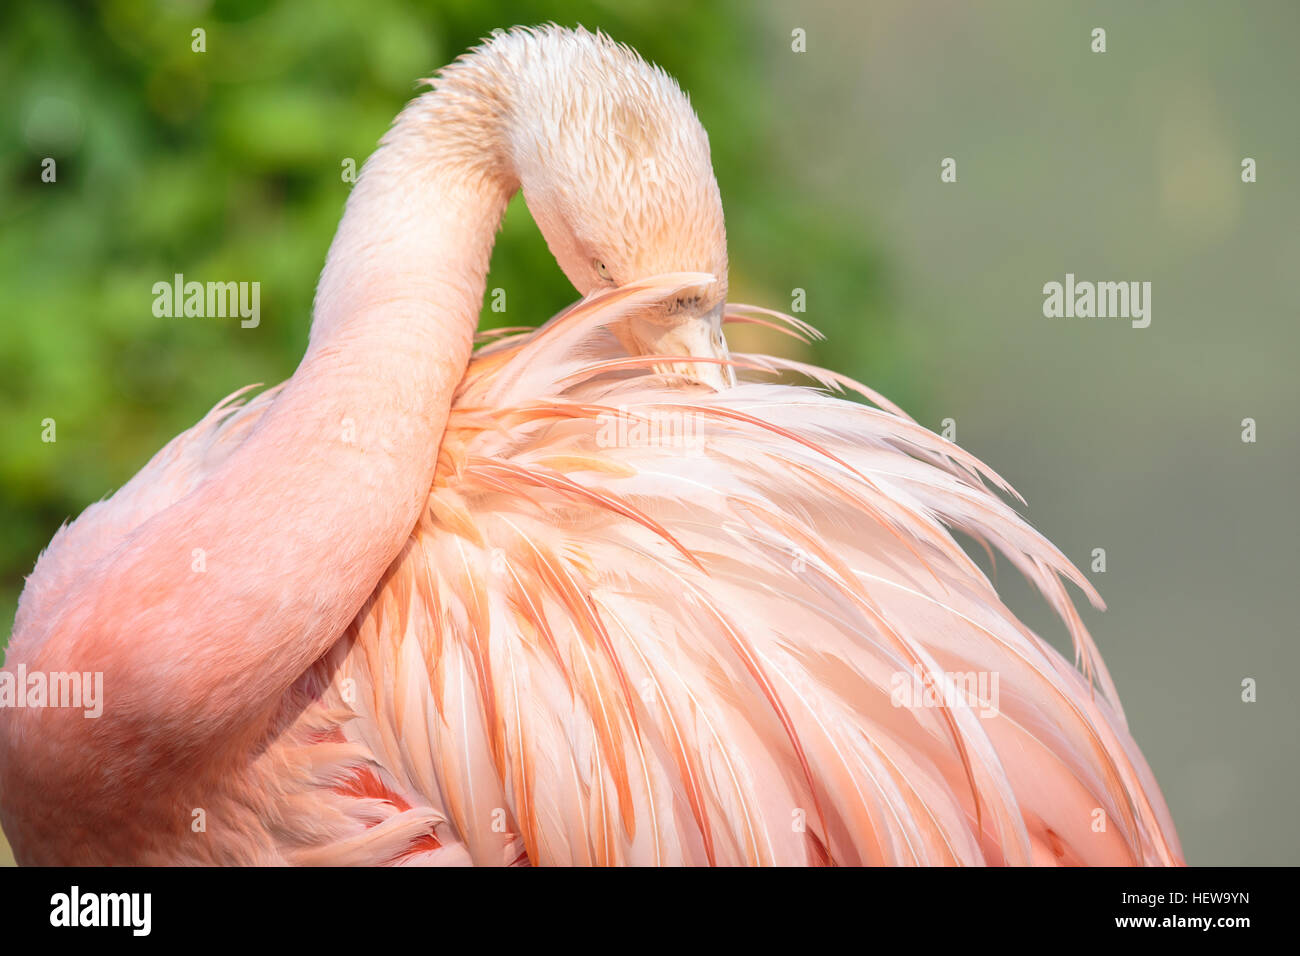 A chilean flamingo, Phoenicopterus chilensis, with the bill hidden in the feathers of the back. The plumage of this large bird is pinker than the grea Stock Photo